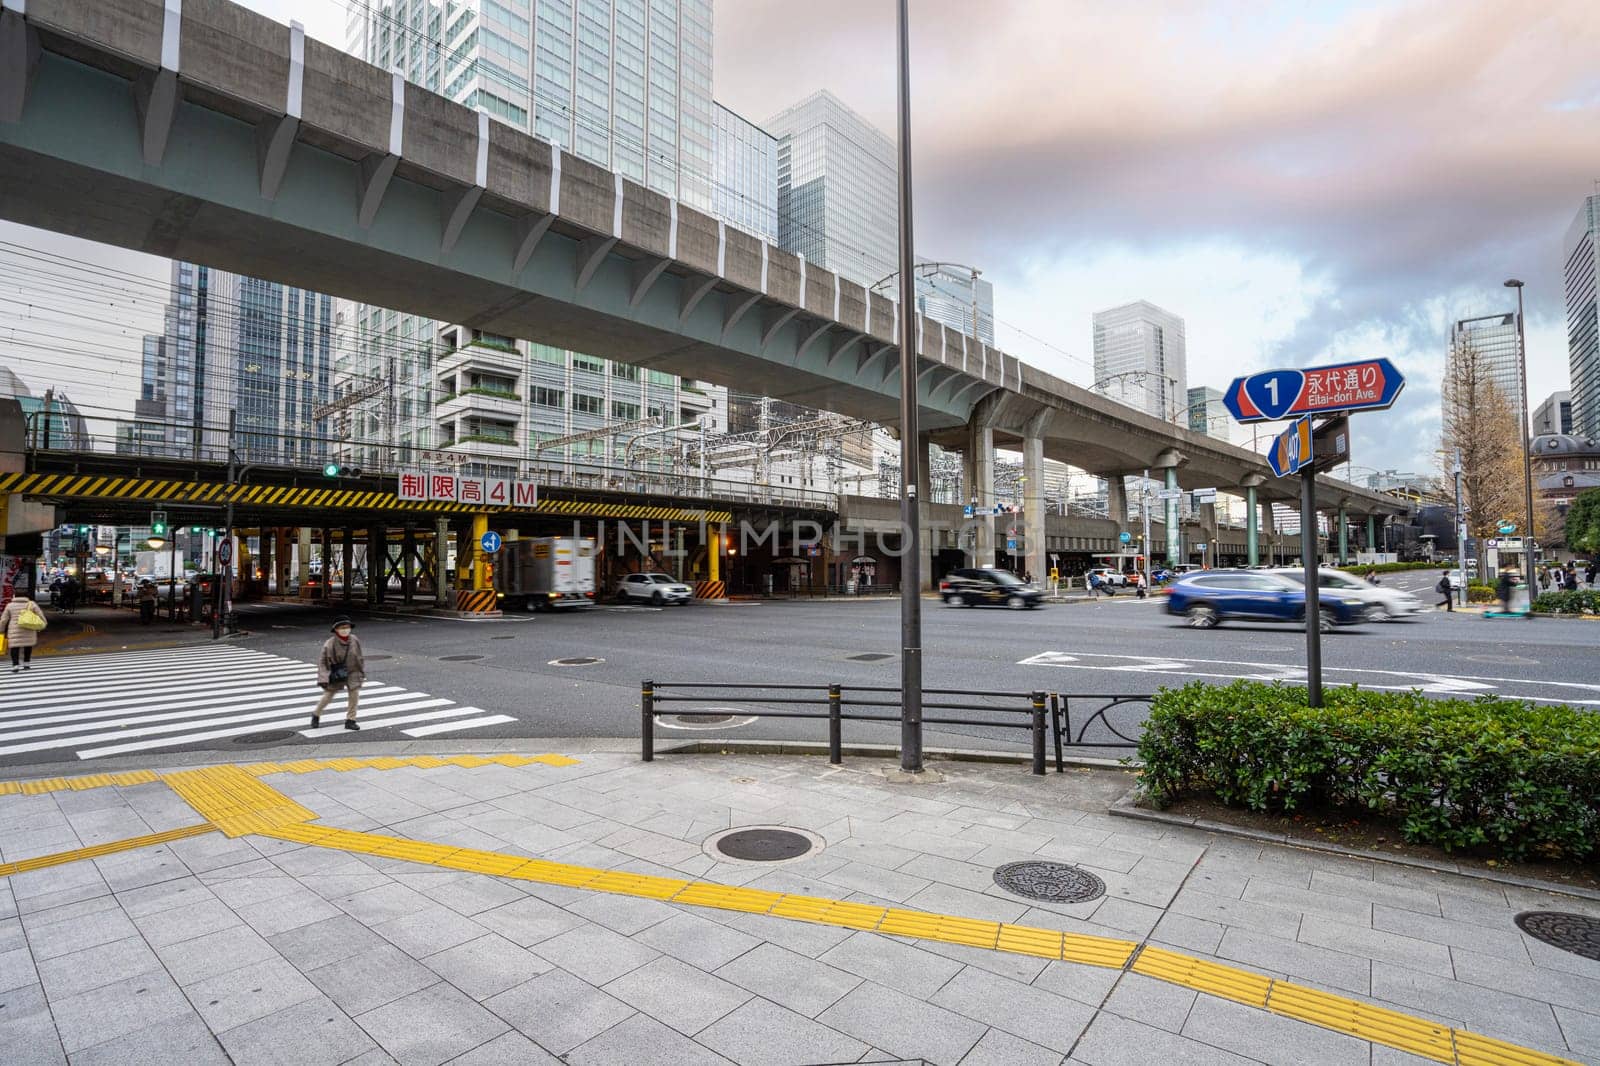 Tokyo, Japan. January 8, 2024. The railway and road viaducts in the city center